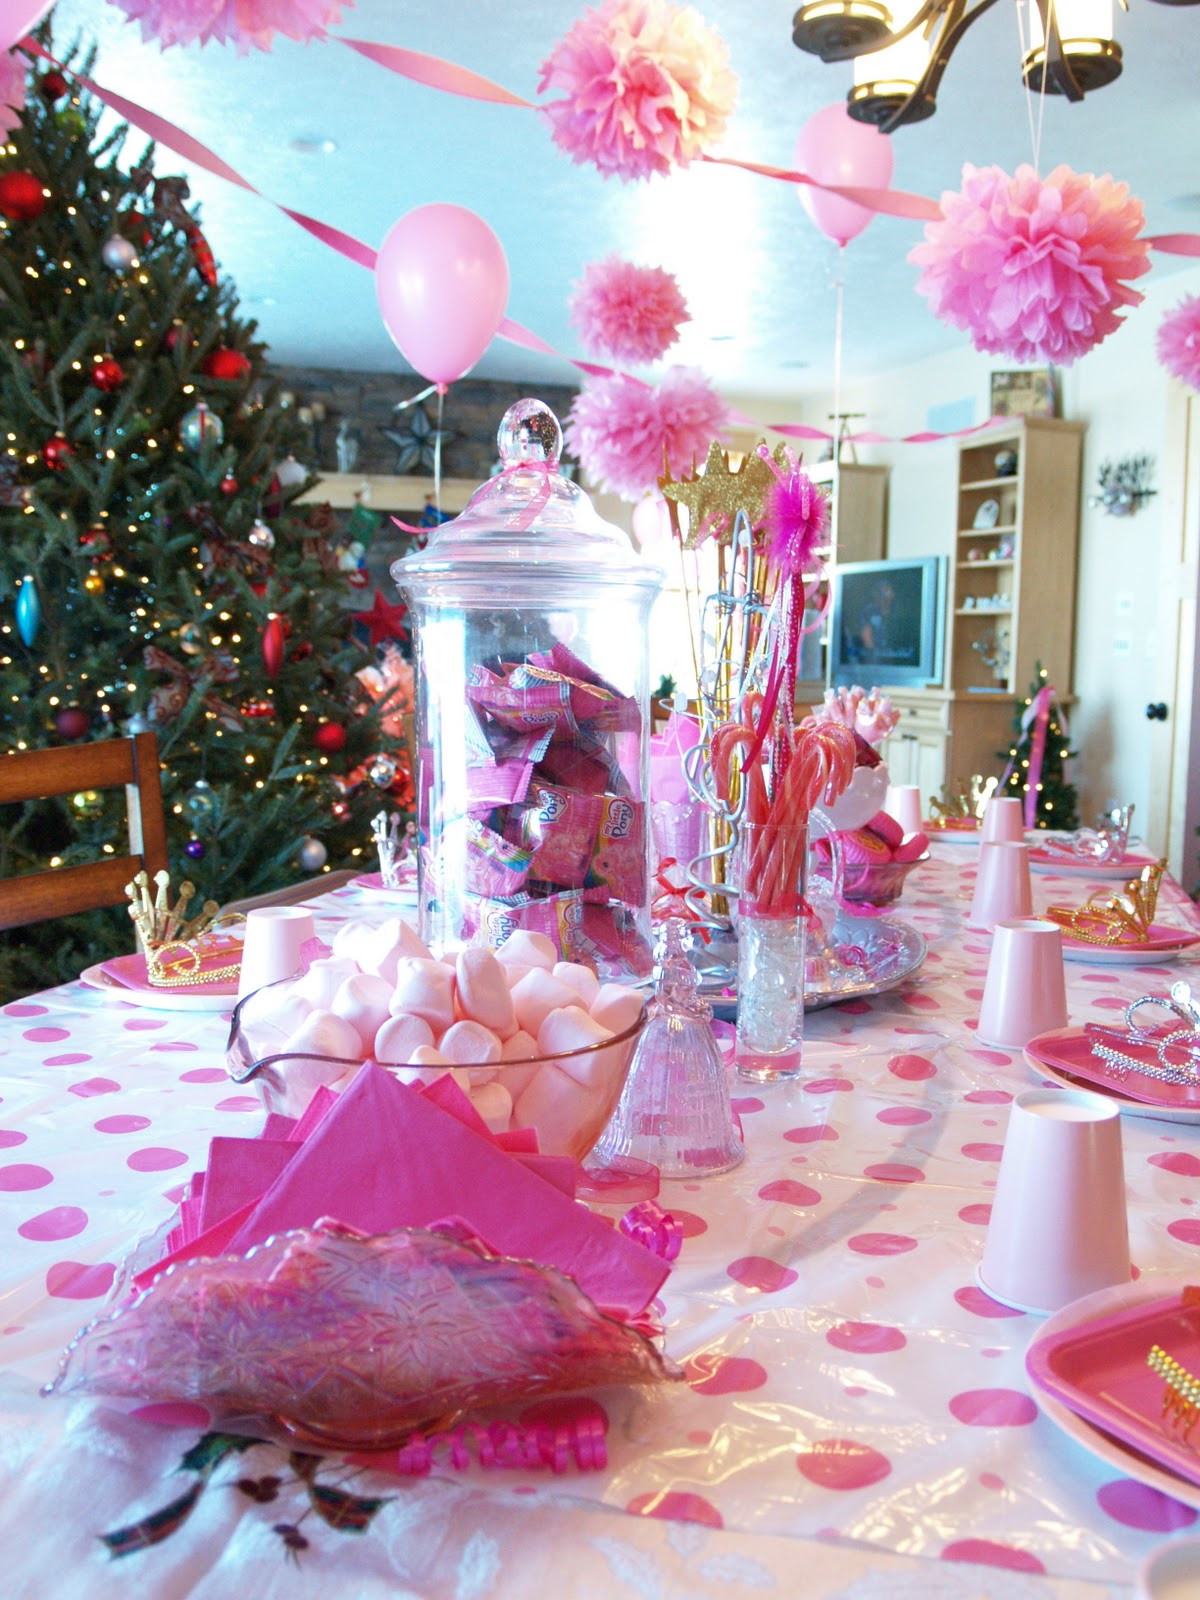 Birthday Party Ideas Decorations
 Show Us Your Life A Pinkalicious Birthday Party The